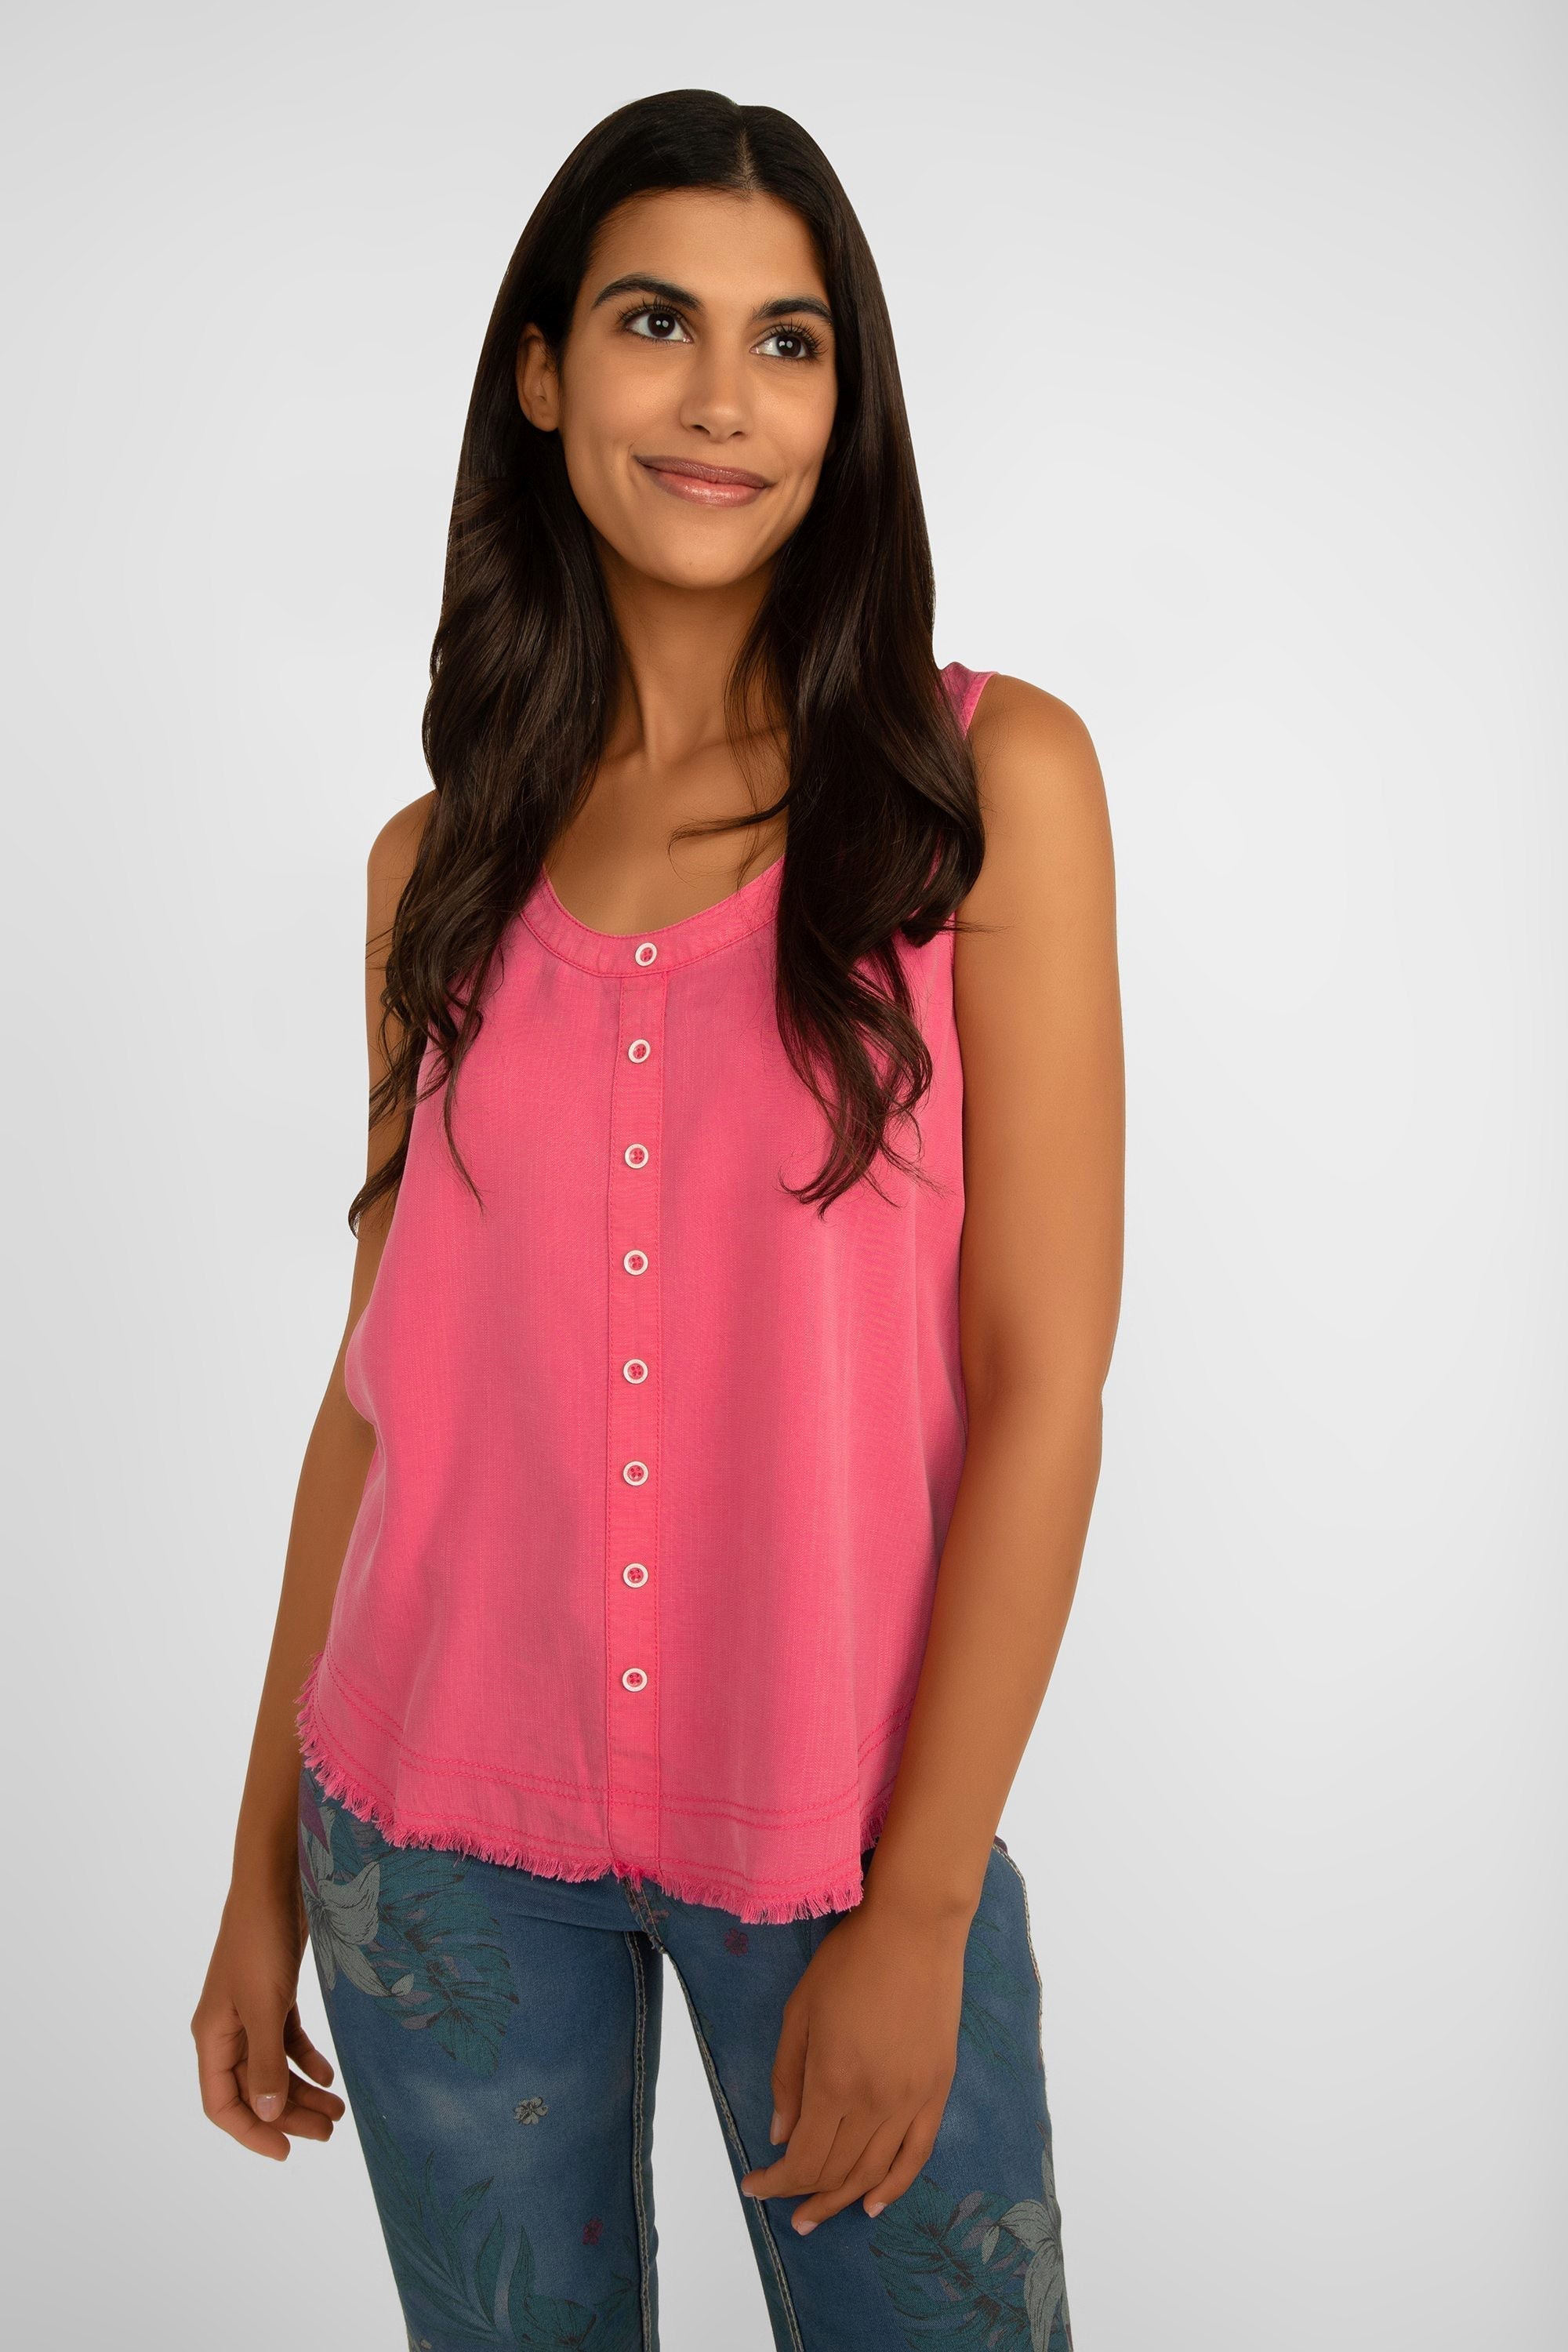 Renuar Clothing (R5015-E2142) Women's Sleeveless Tencel Tank Top with Button Front & Frayed Hem in Magnolia Pink